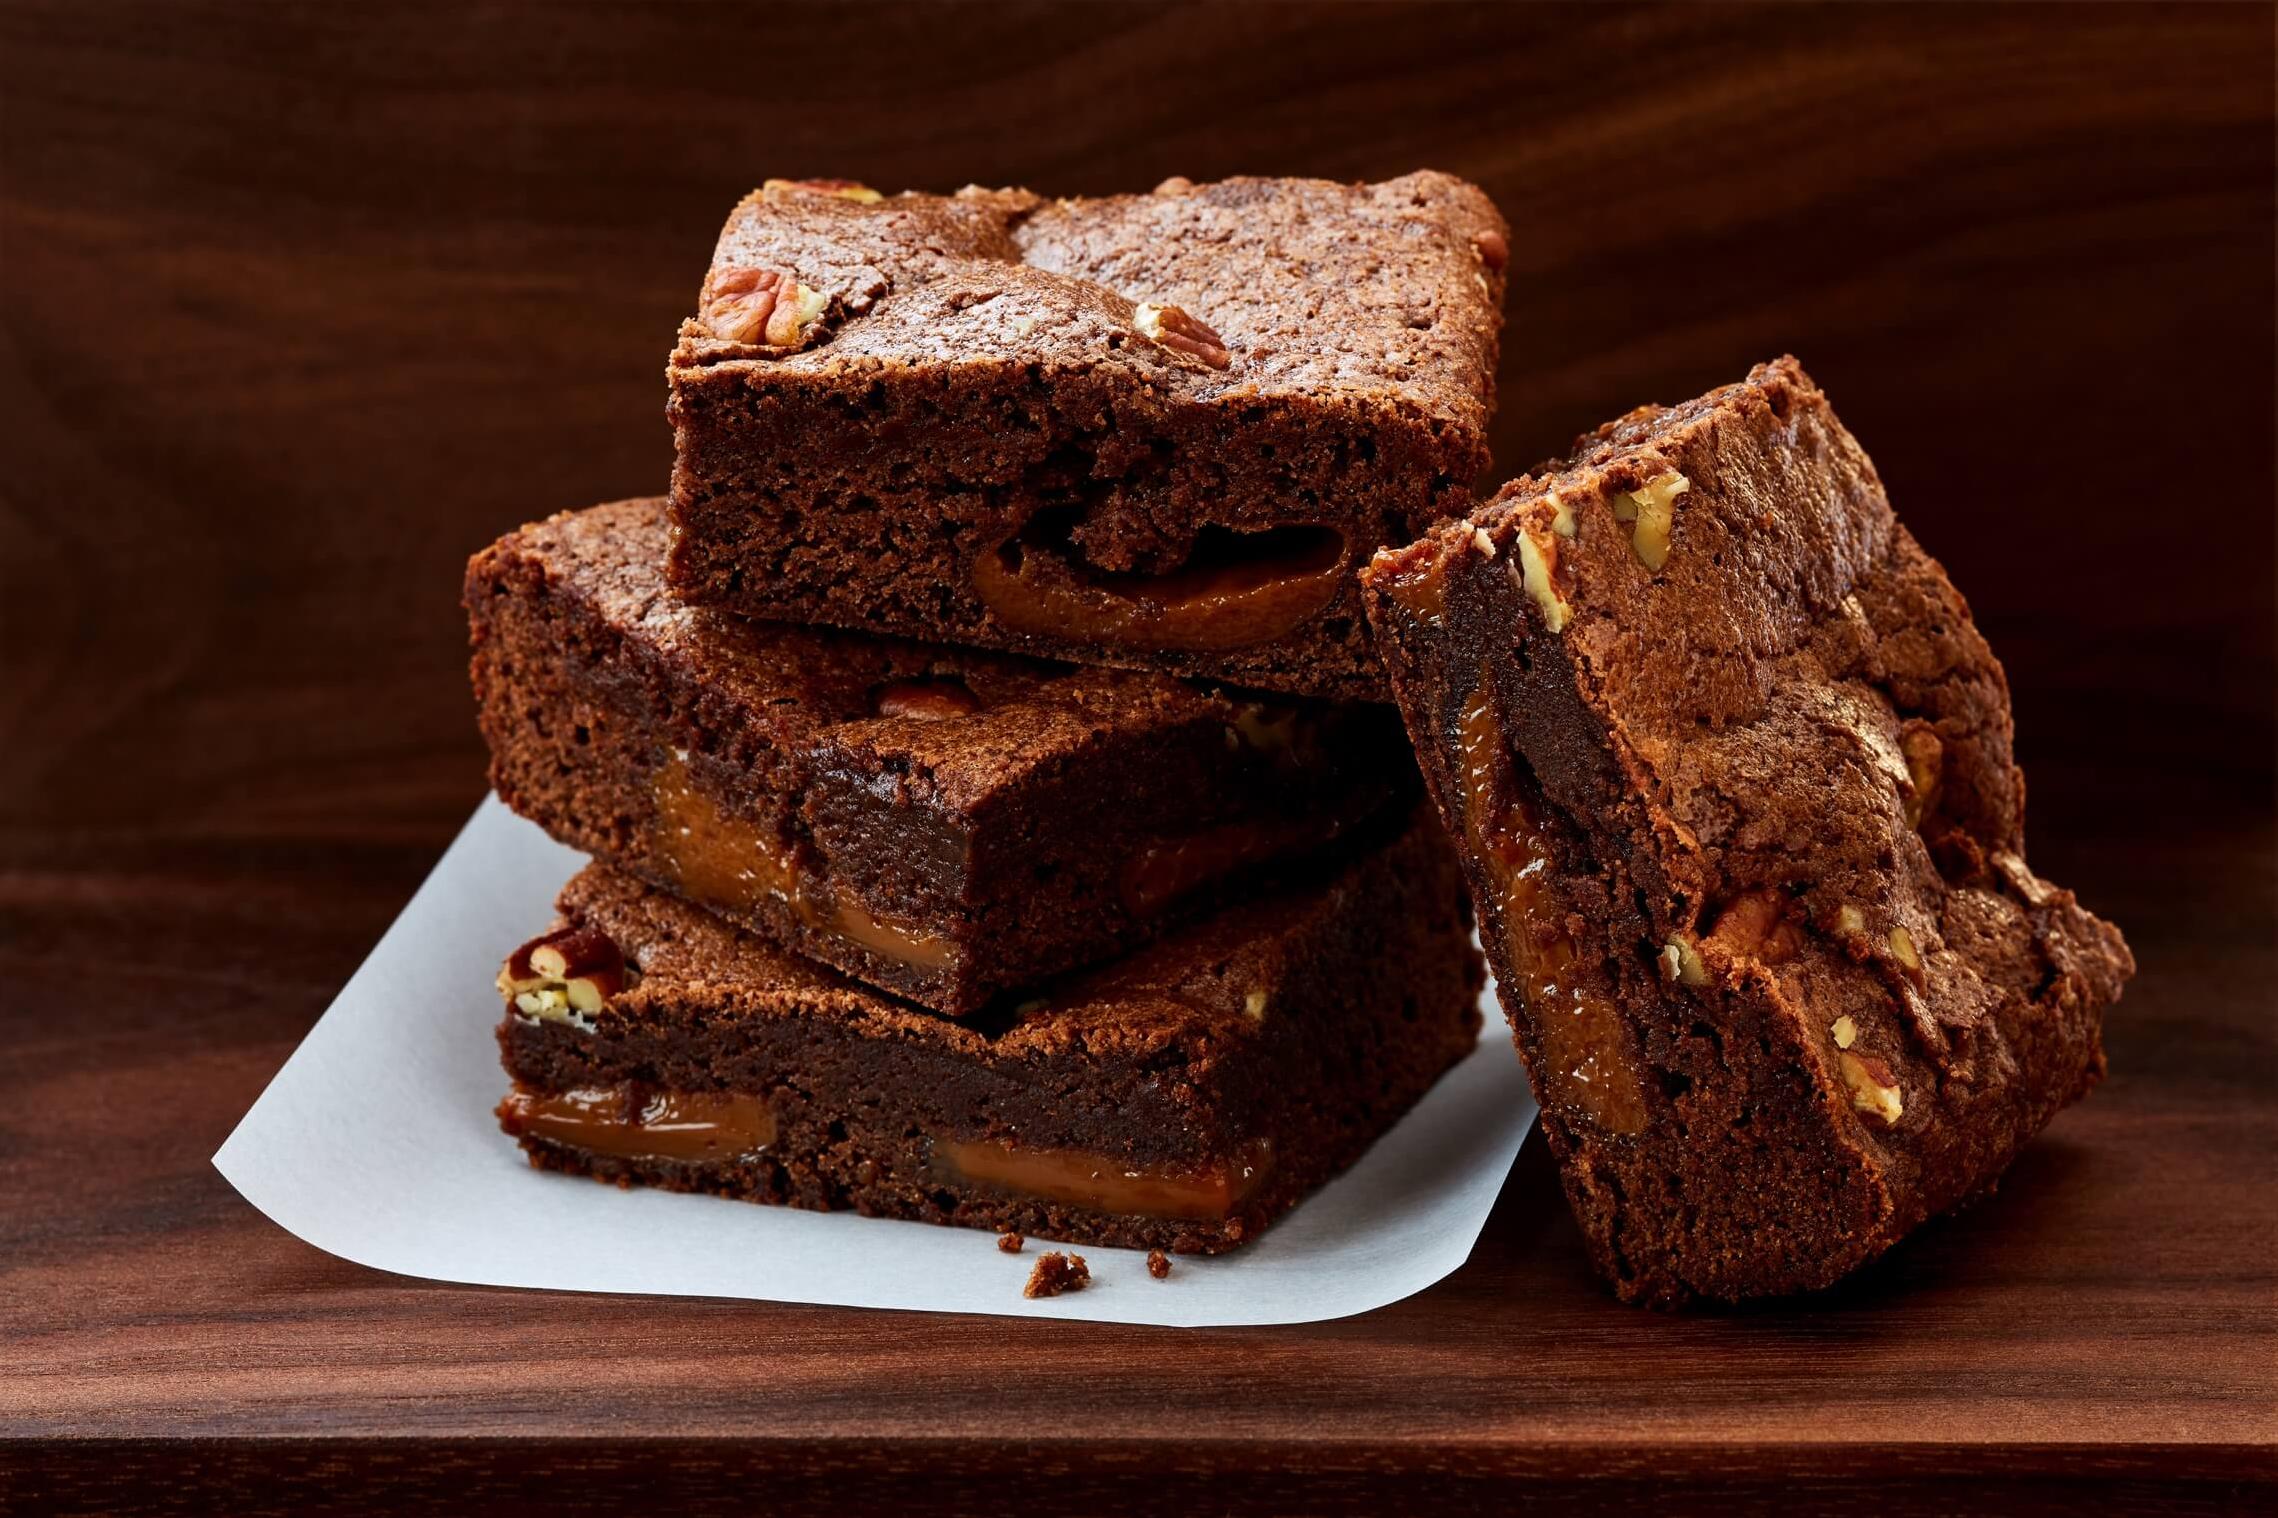  Get ready for a taste explosion in every bite of these decadent brownies.